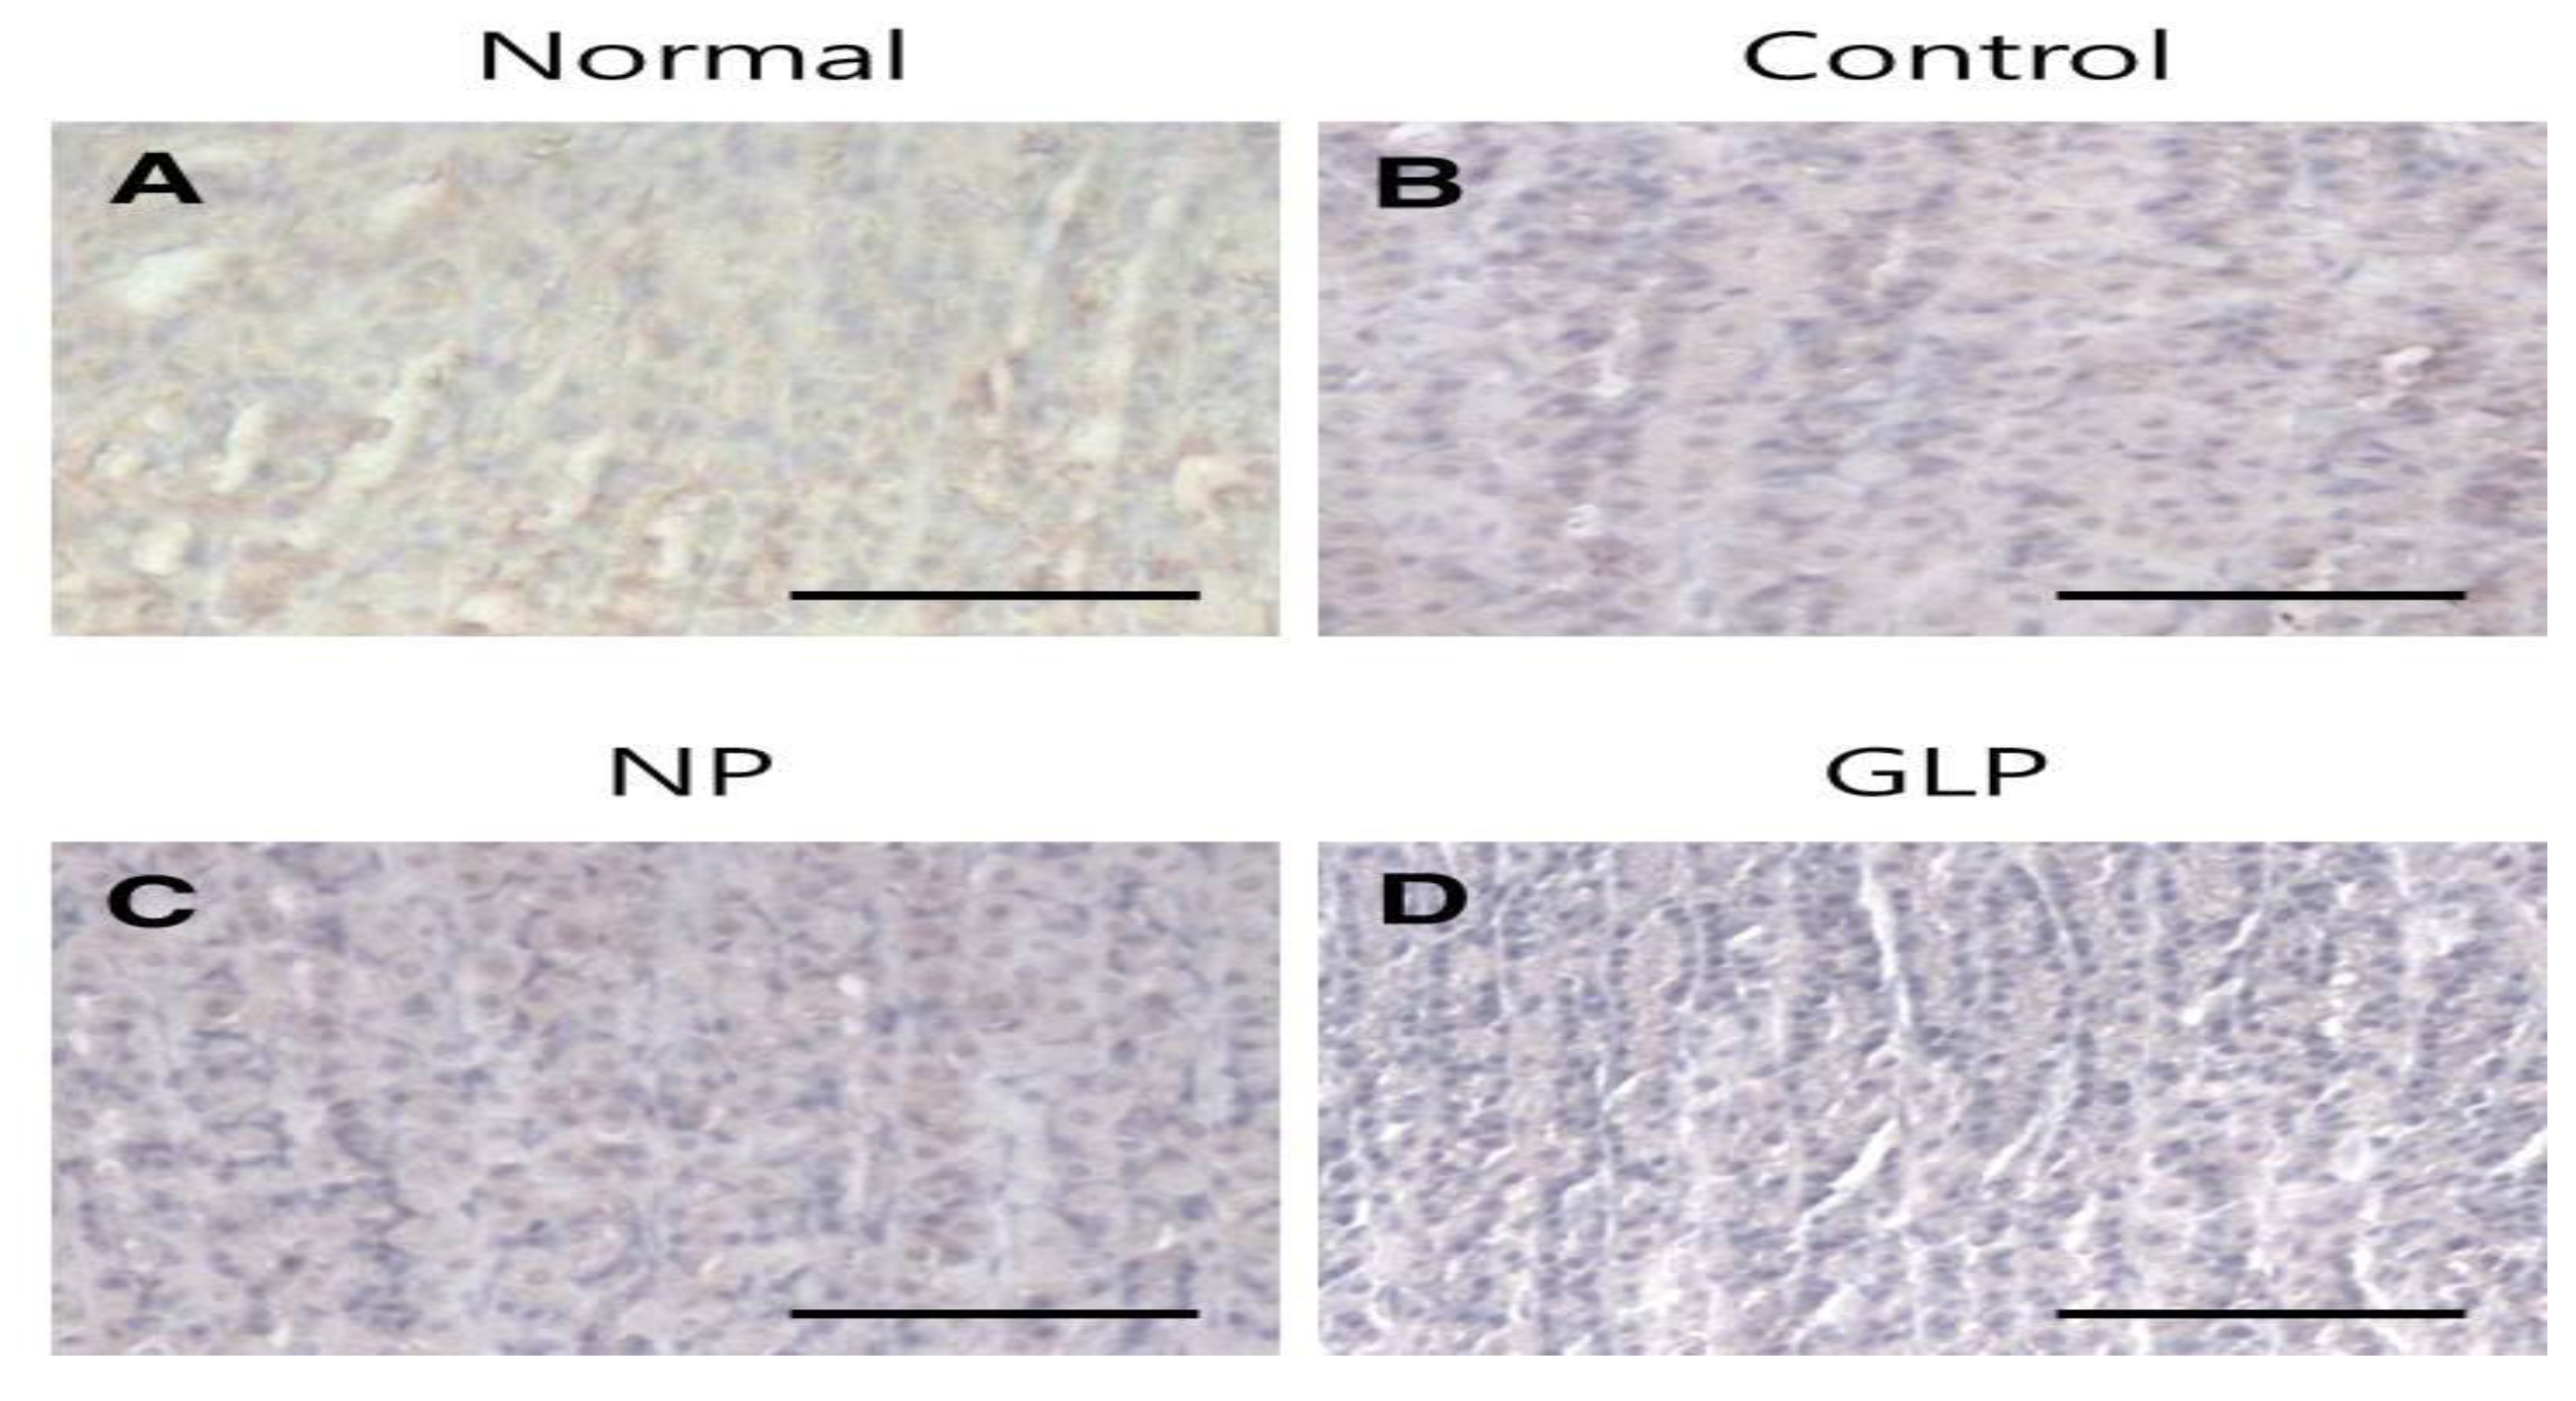 Immunohistochemical staining of TGF-β1 proteins in EtOH-induced chronic gastric ulcers in rats.